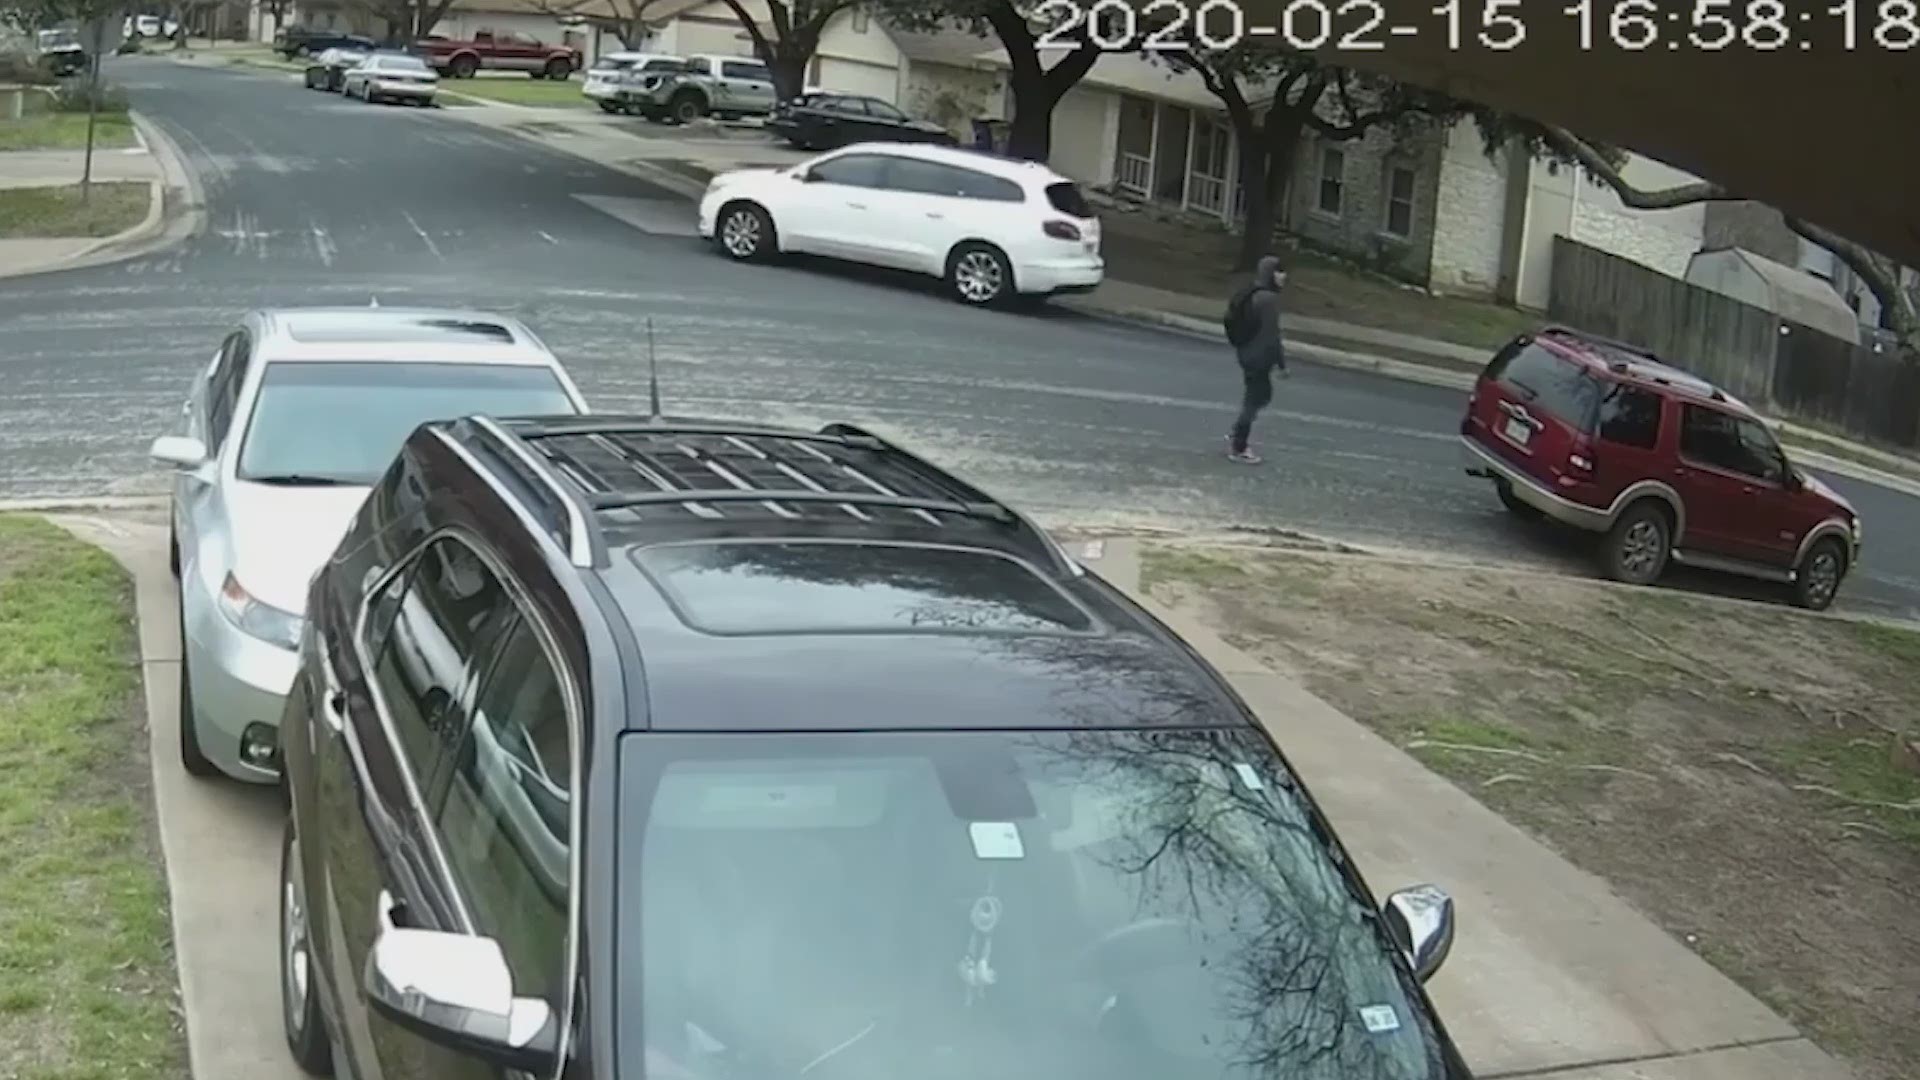 An Austin car owner took matters into their own hands when they said they saw a thief rummaging through their car.